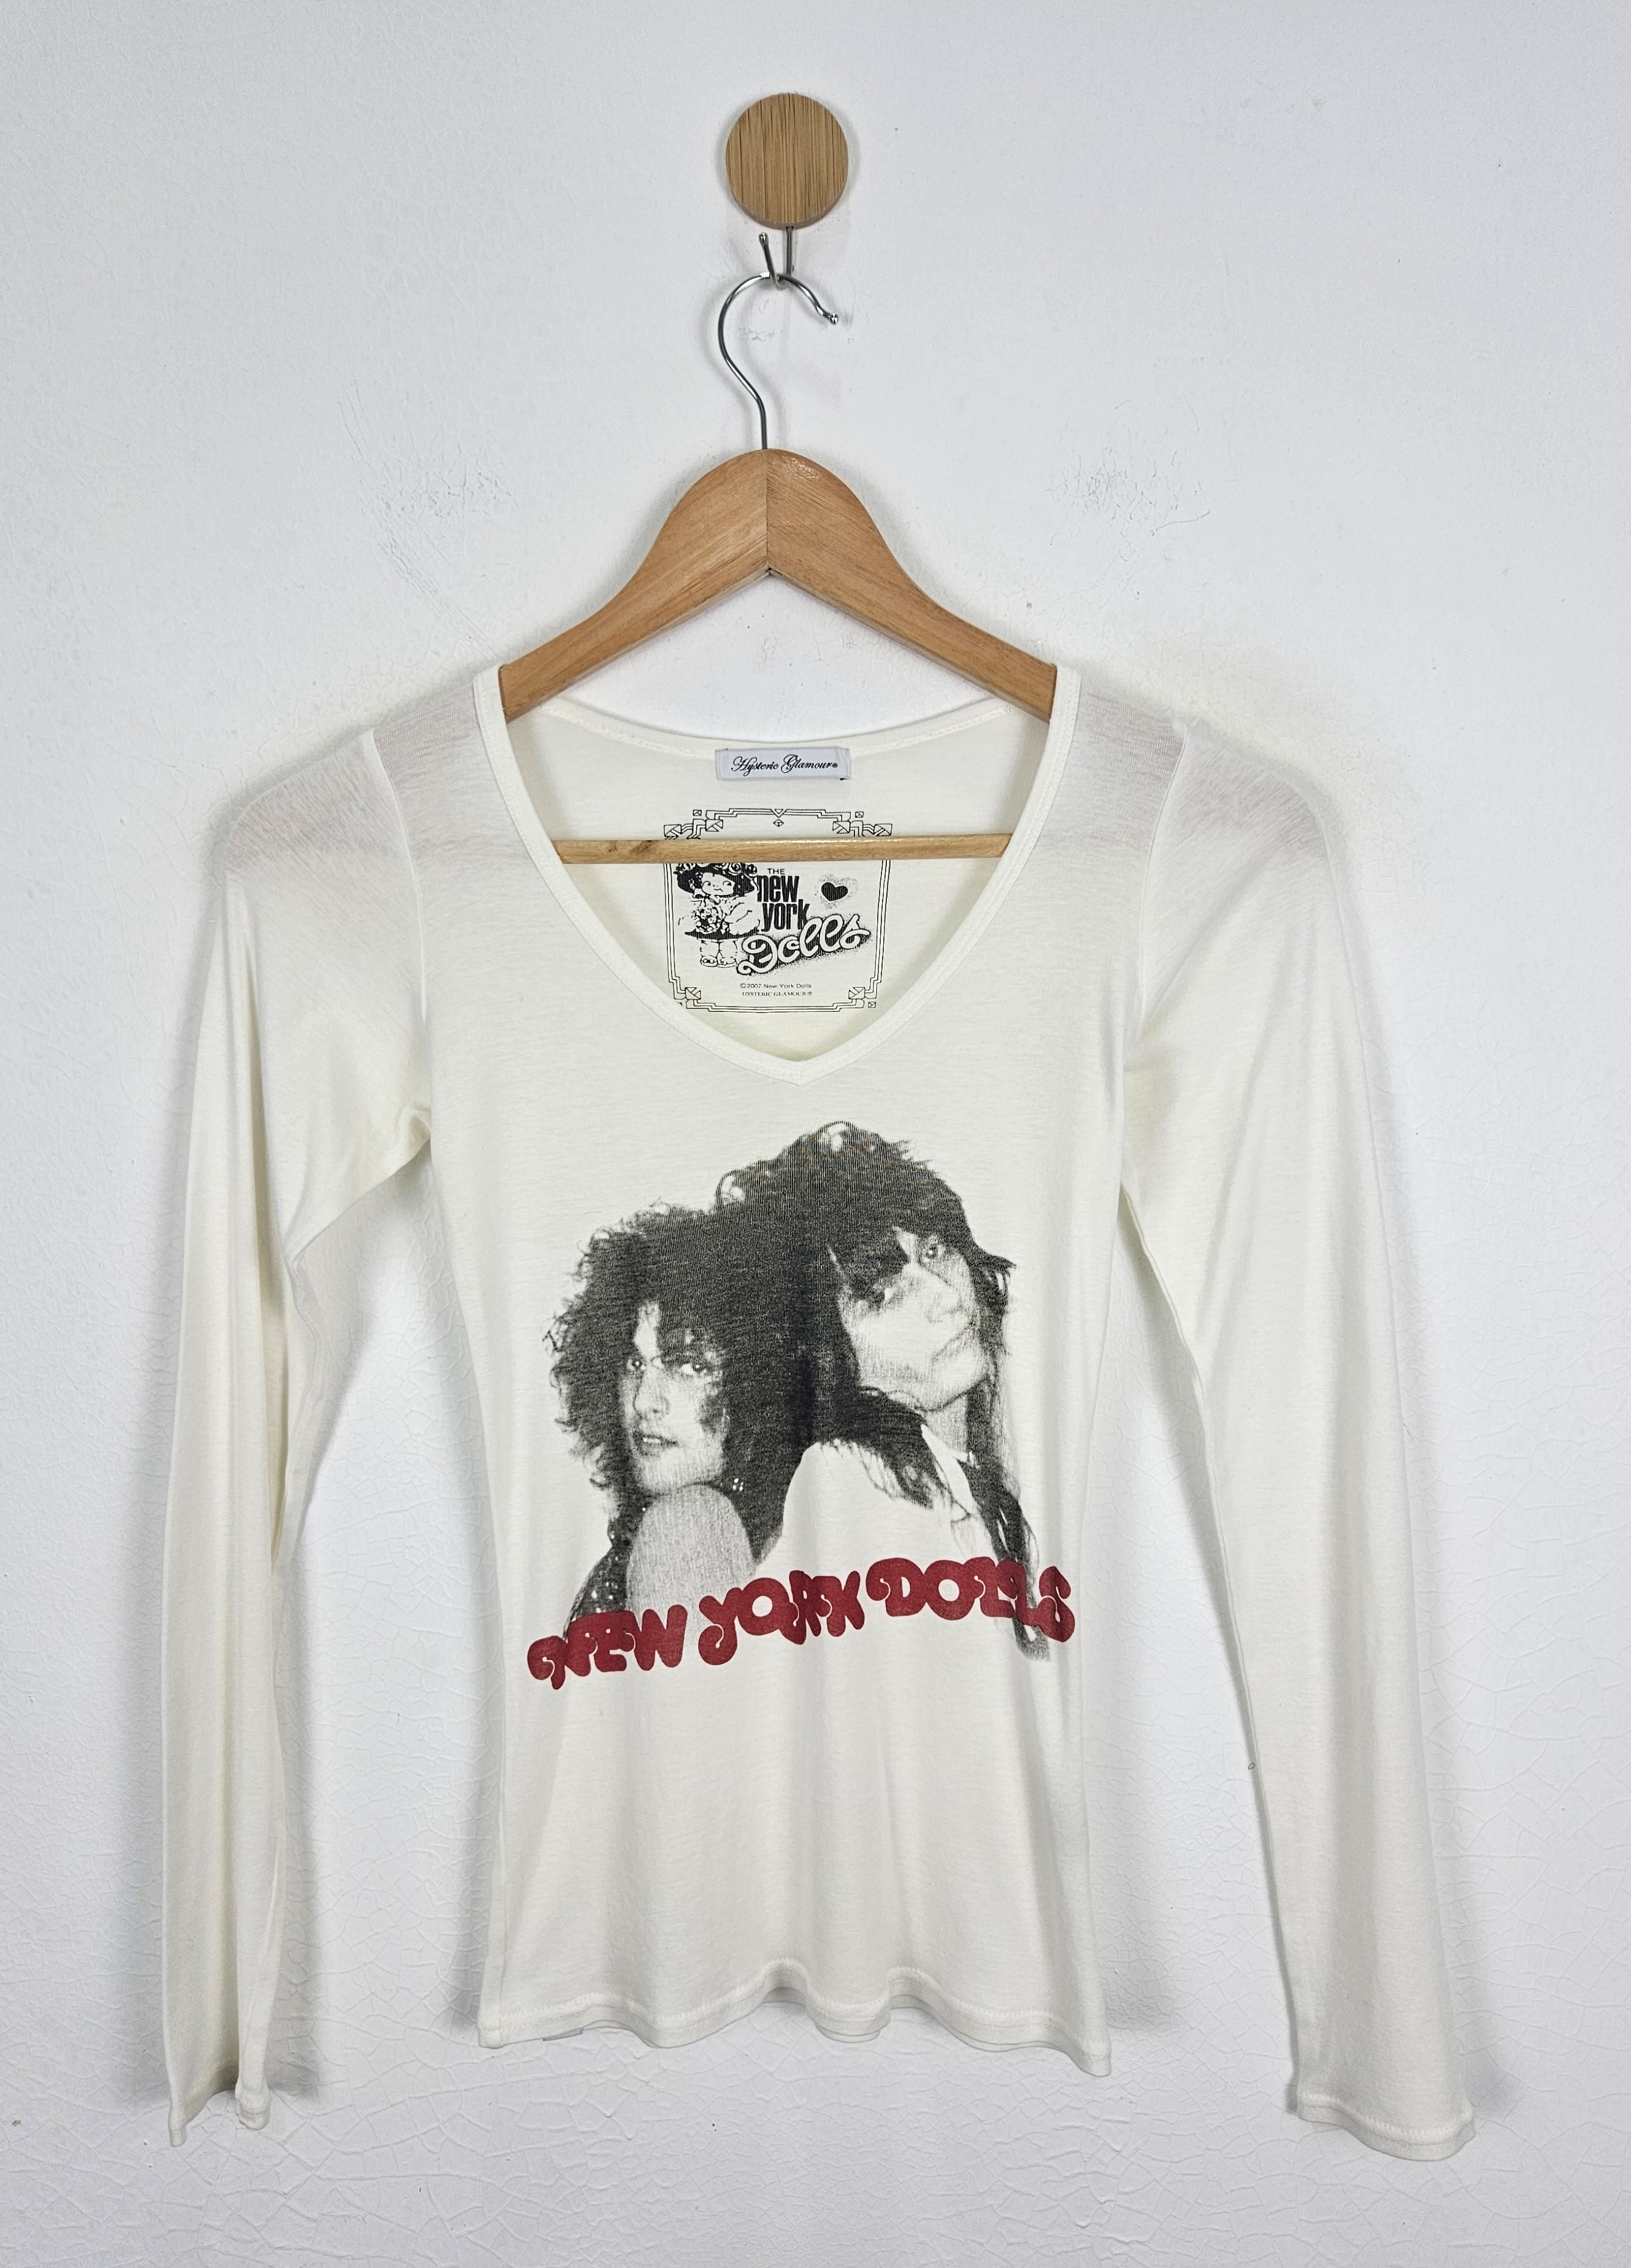 Hysteric Glamour - Hysteric Glamour New York Dolls shirt - 1